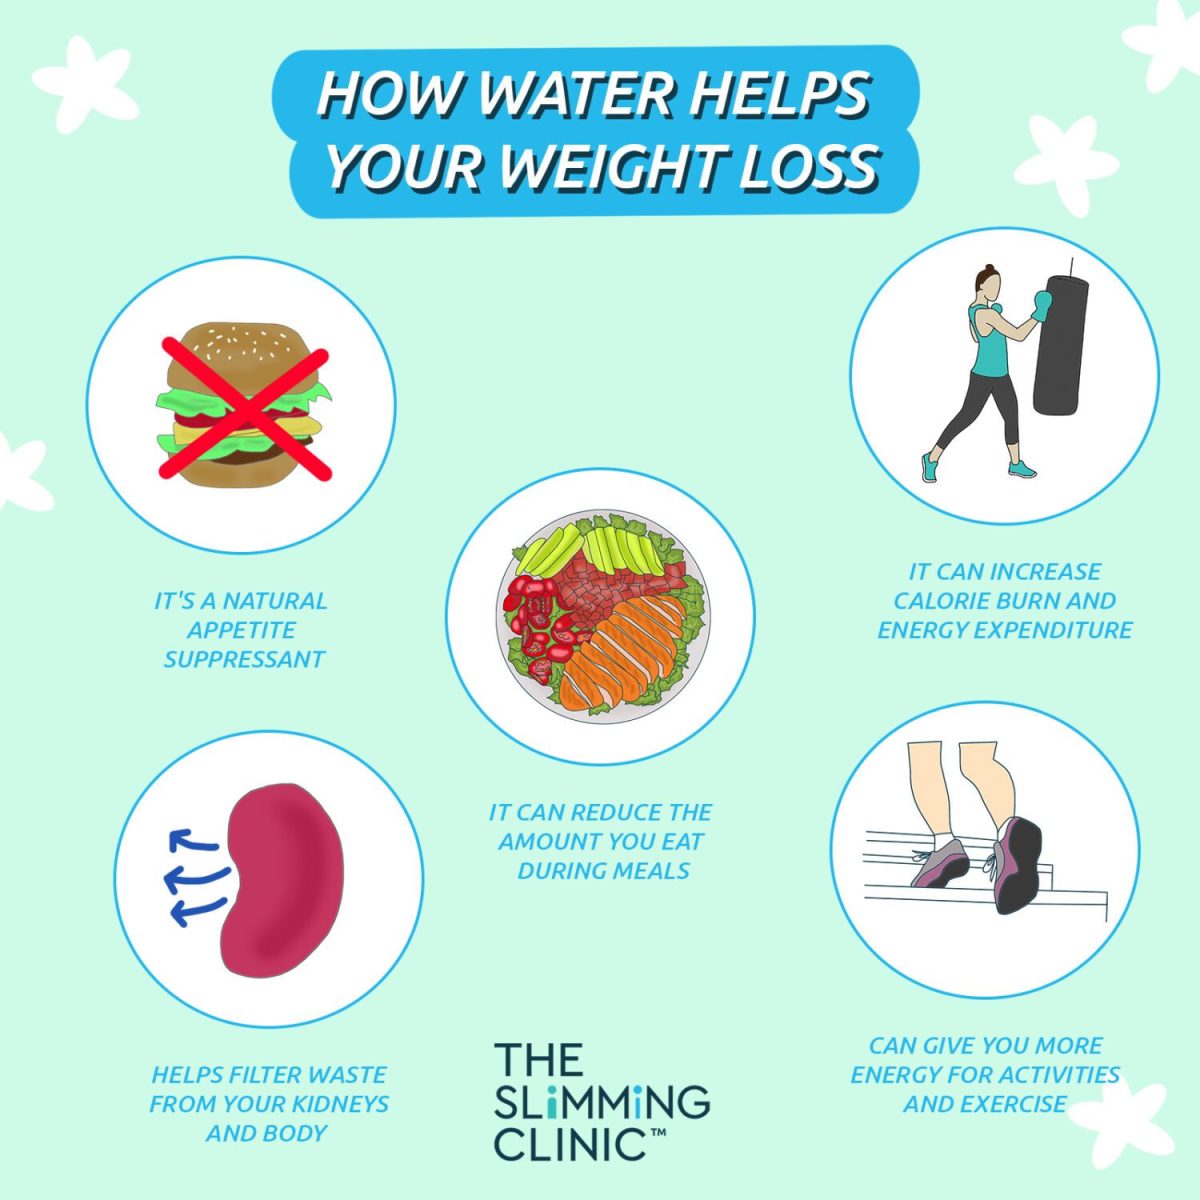 How Water Helps Your Weight Loss